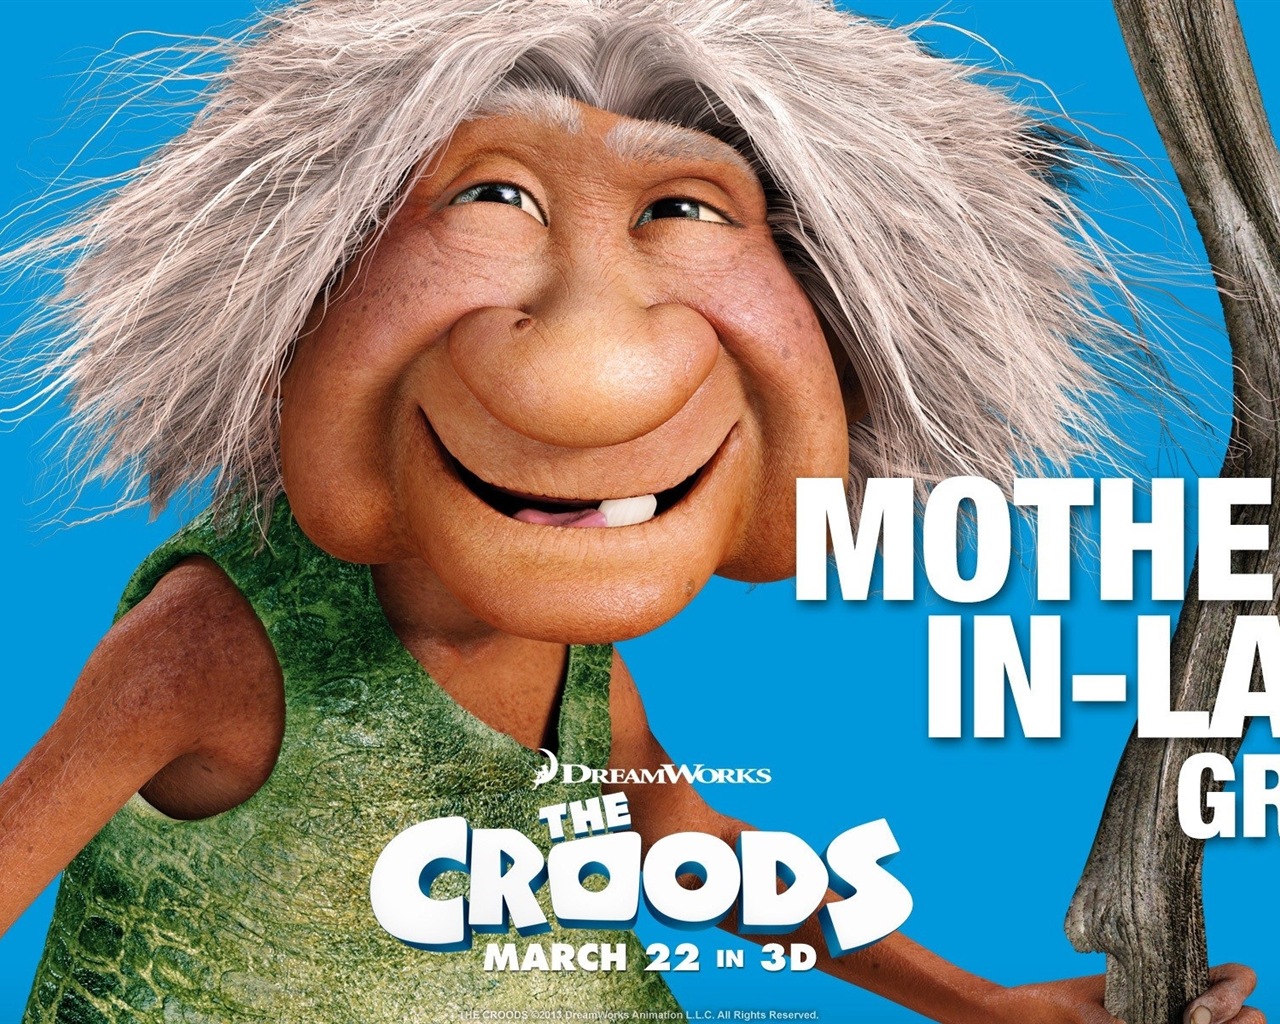 The Croods HD movie wallpapers #6 - 1280x1024